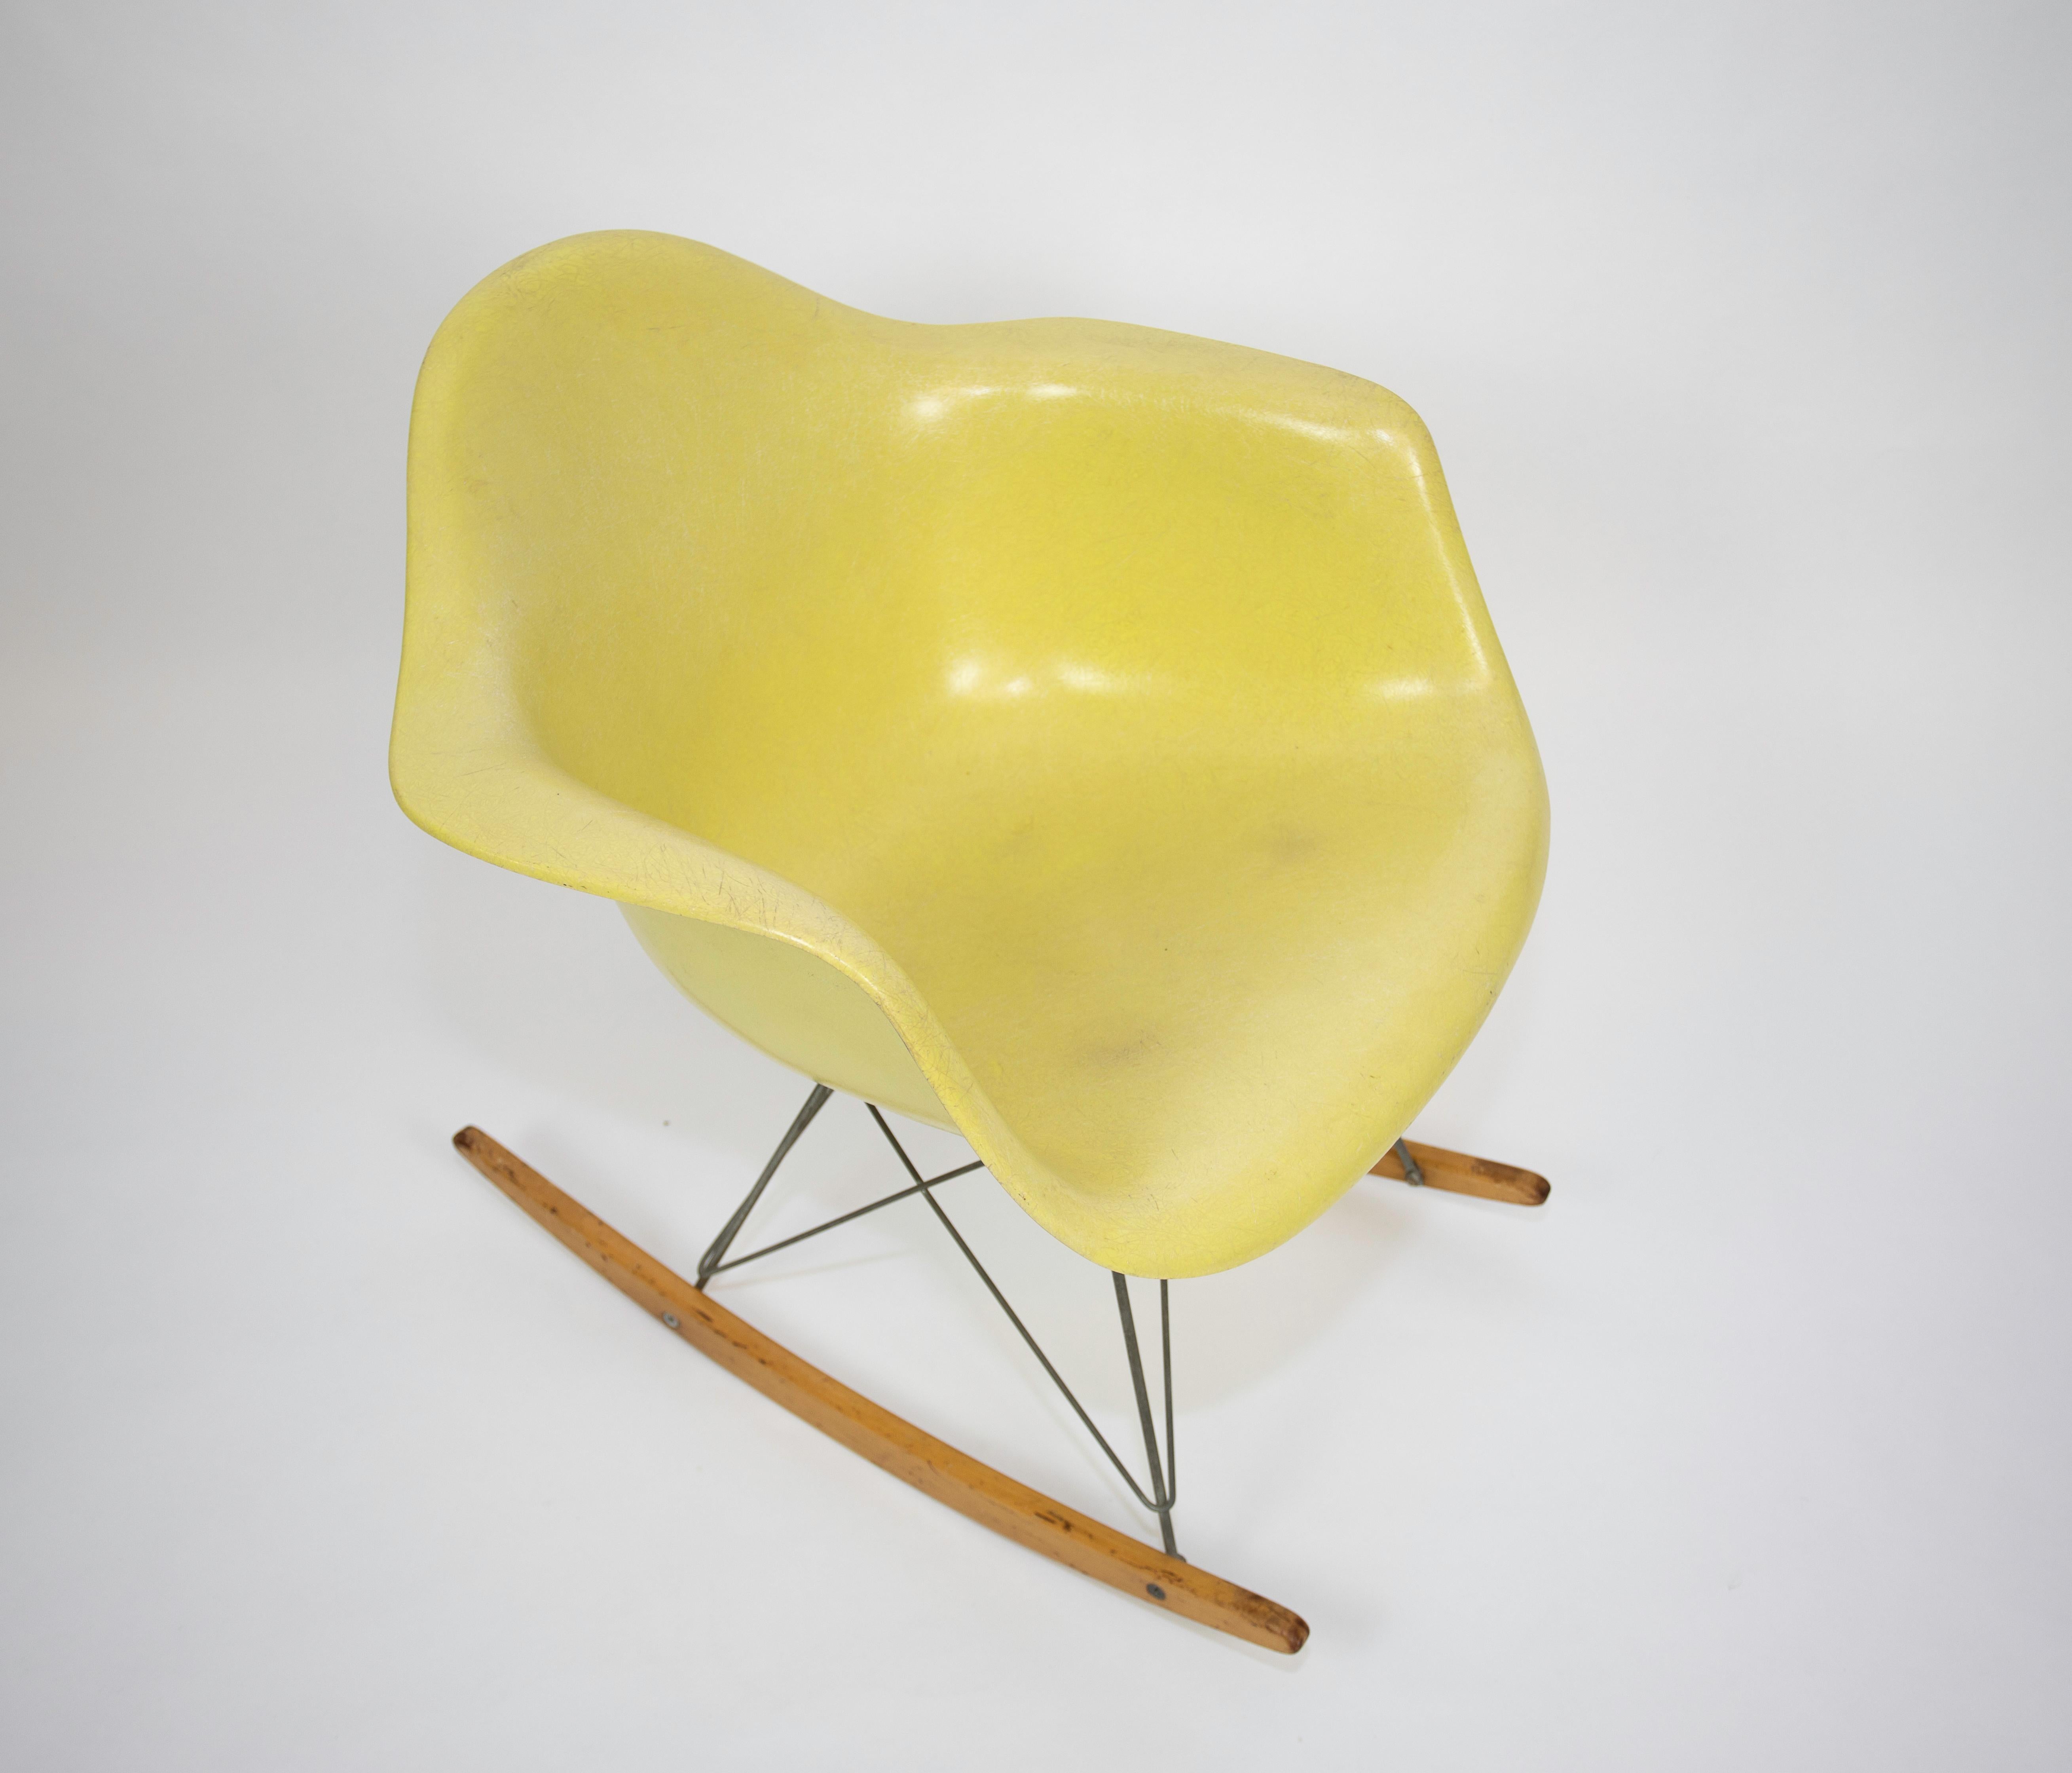 An early Lemon yellow rocker with its original base.
Manufacturer's Label and Date Stamp.